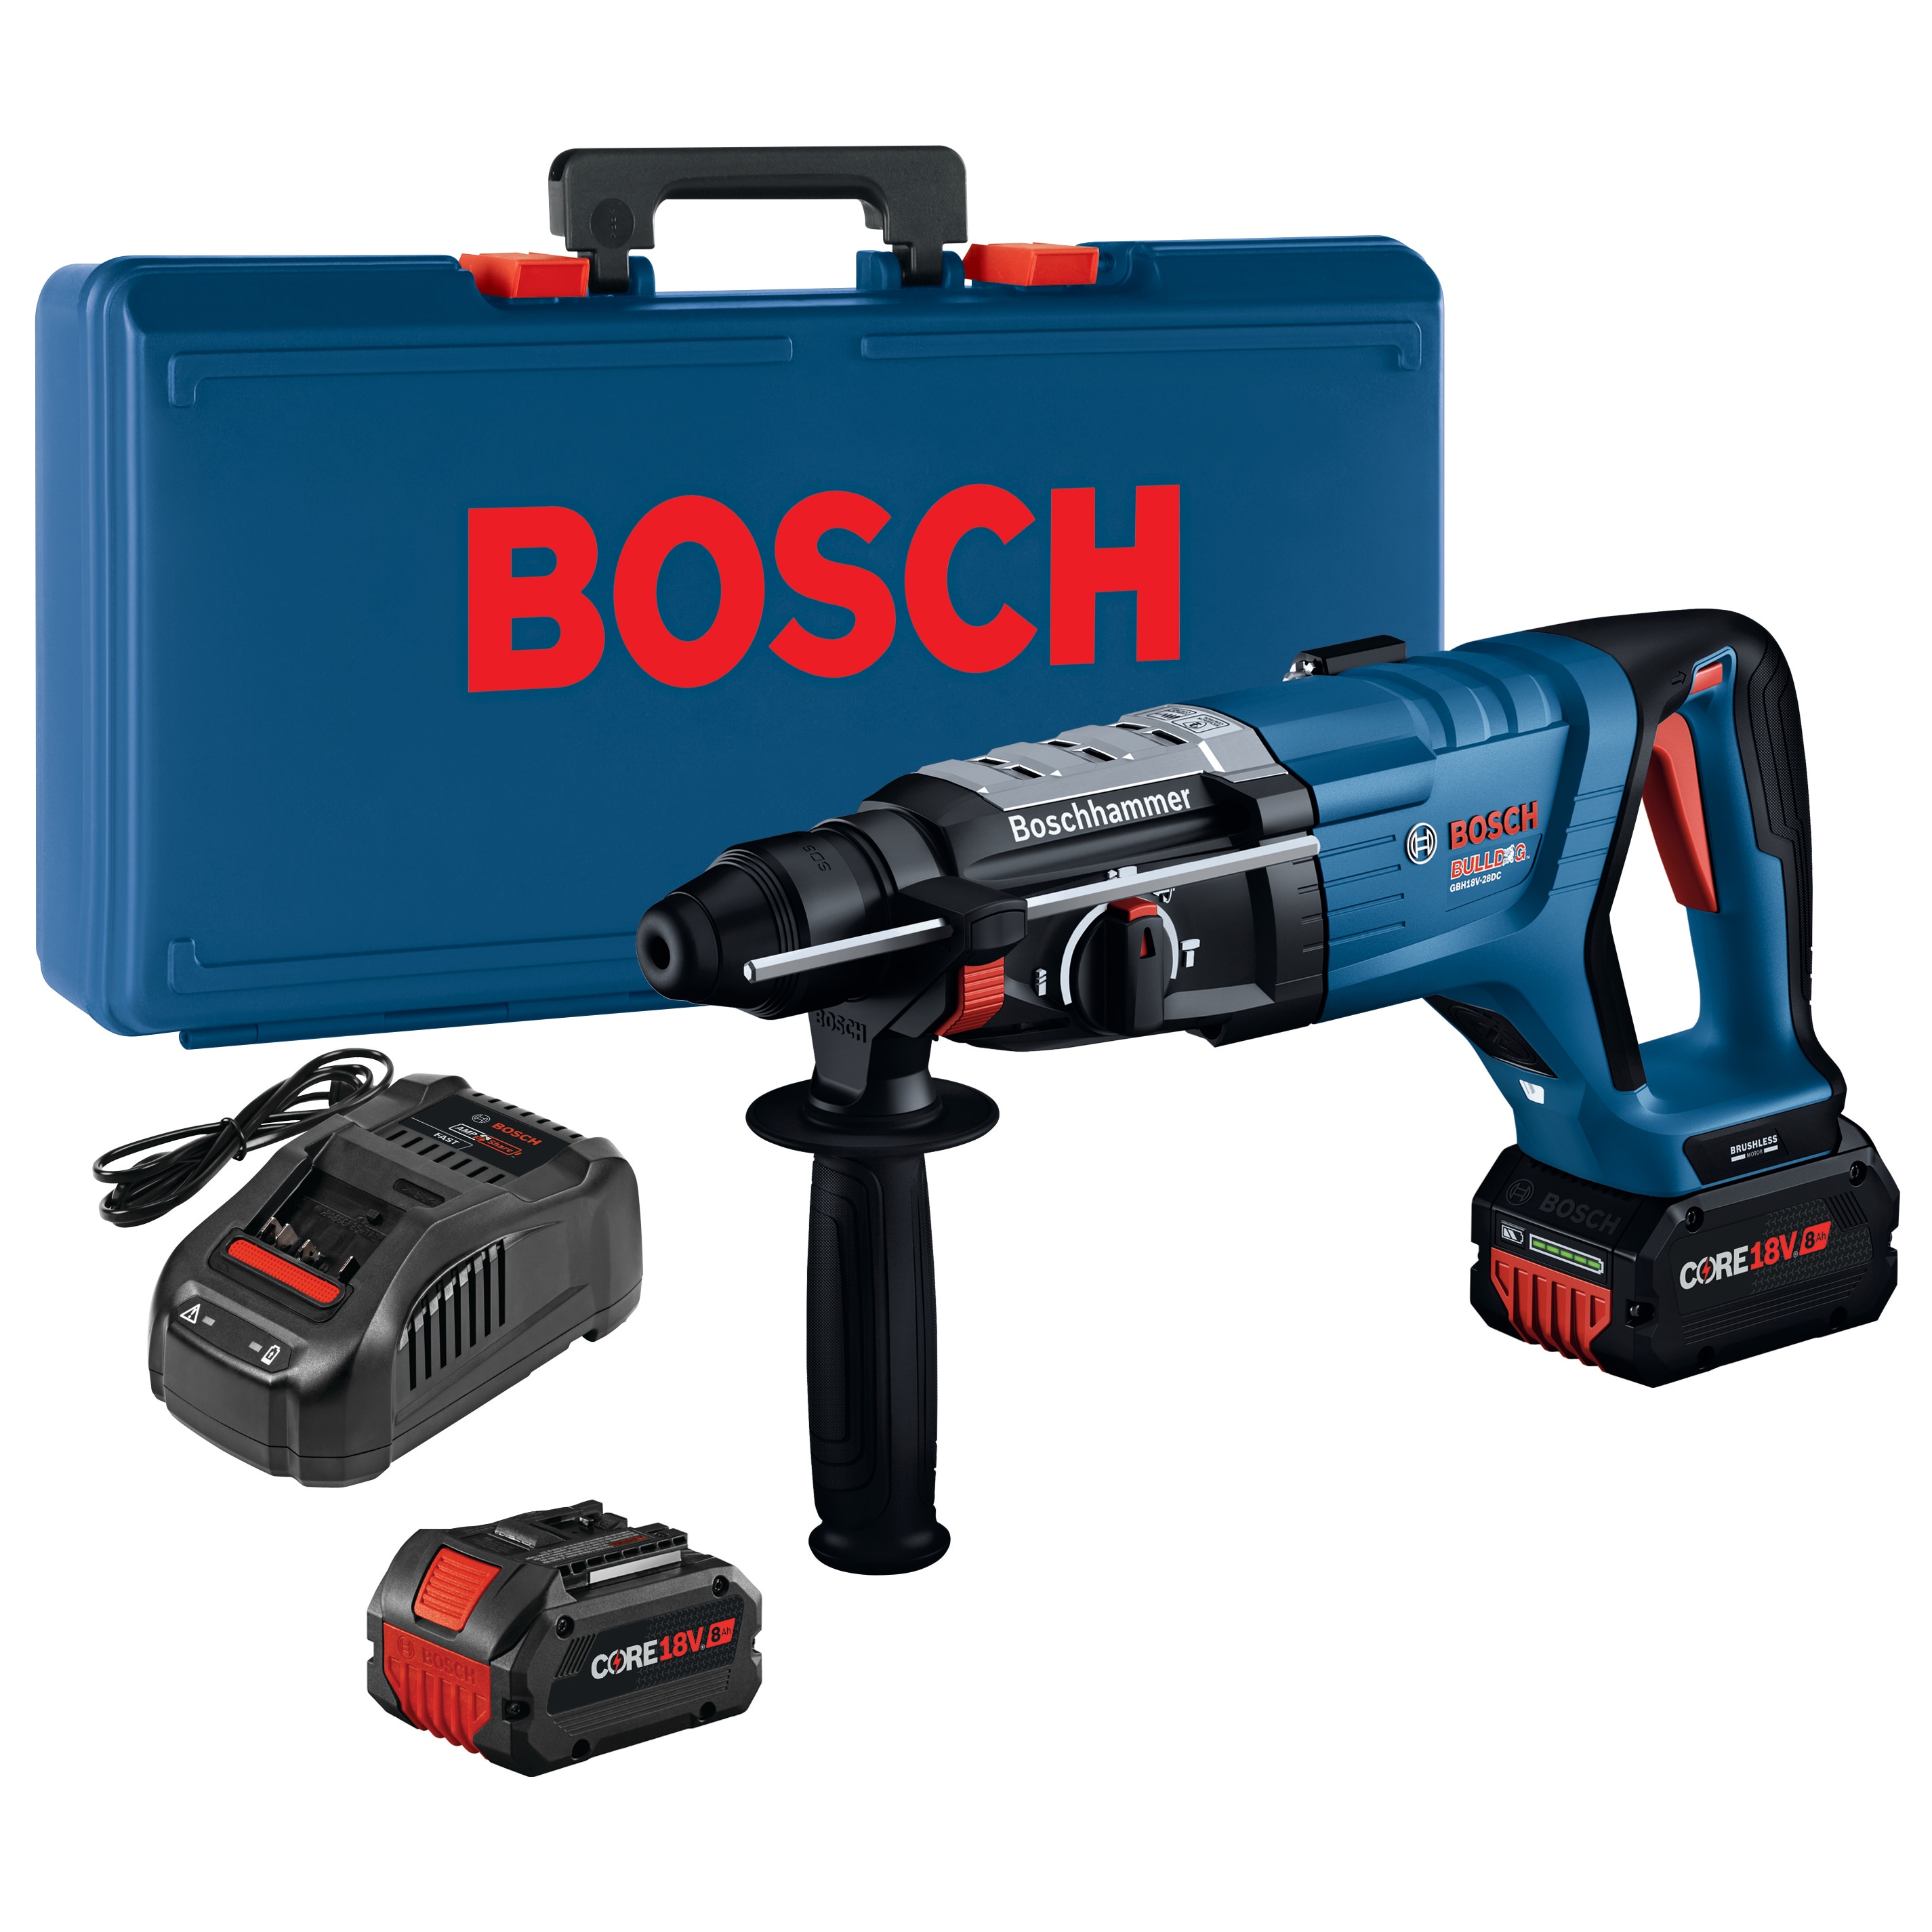 BOSCH GBH18V-34CQB24 PROFACTOR 18V Connected-Ready SDS-plus(R) Bulldog(TM) -1/4 In. Rotary Hammer with (2) CORE18V 8.0 Ah PROFACTOR Perform 電動工具 